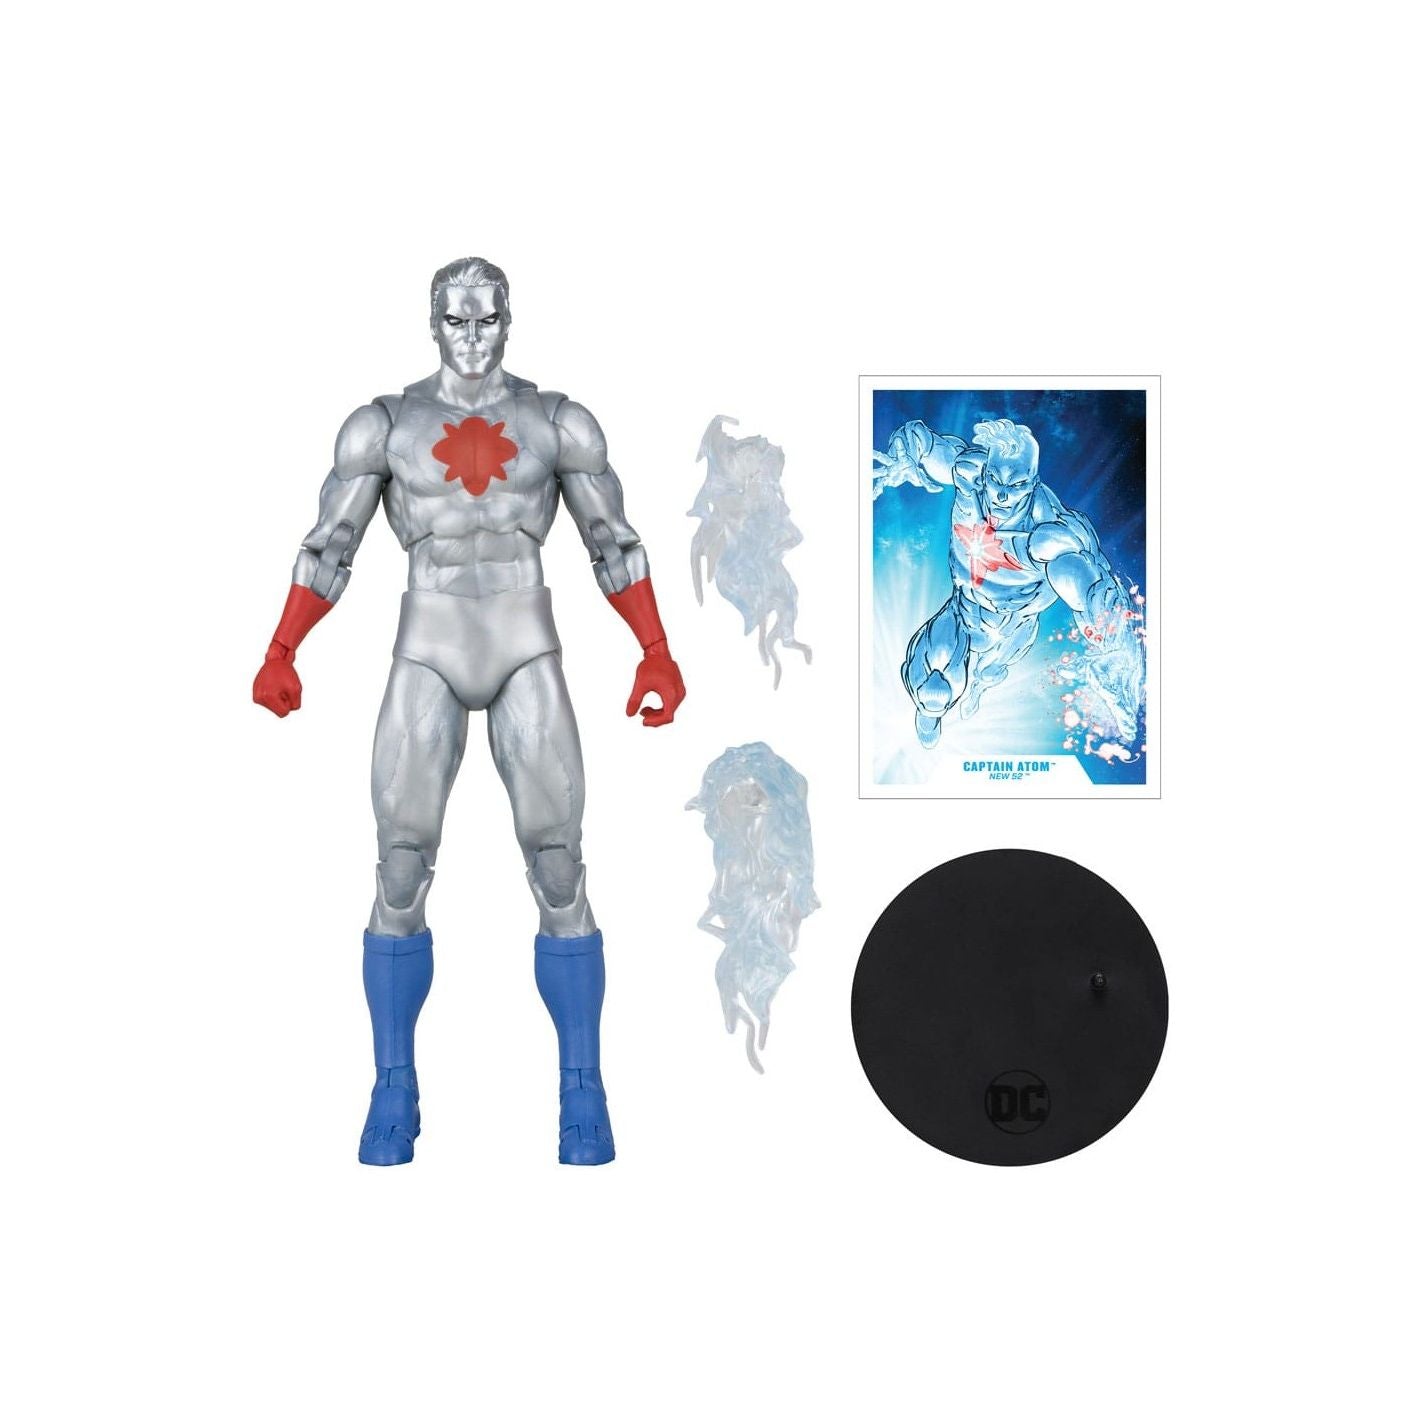 DC Multiverse Captain Atom (New 52) Gold Label Action Figure Toy with accessories - Heretoserveyou